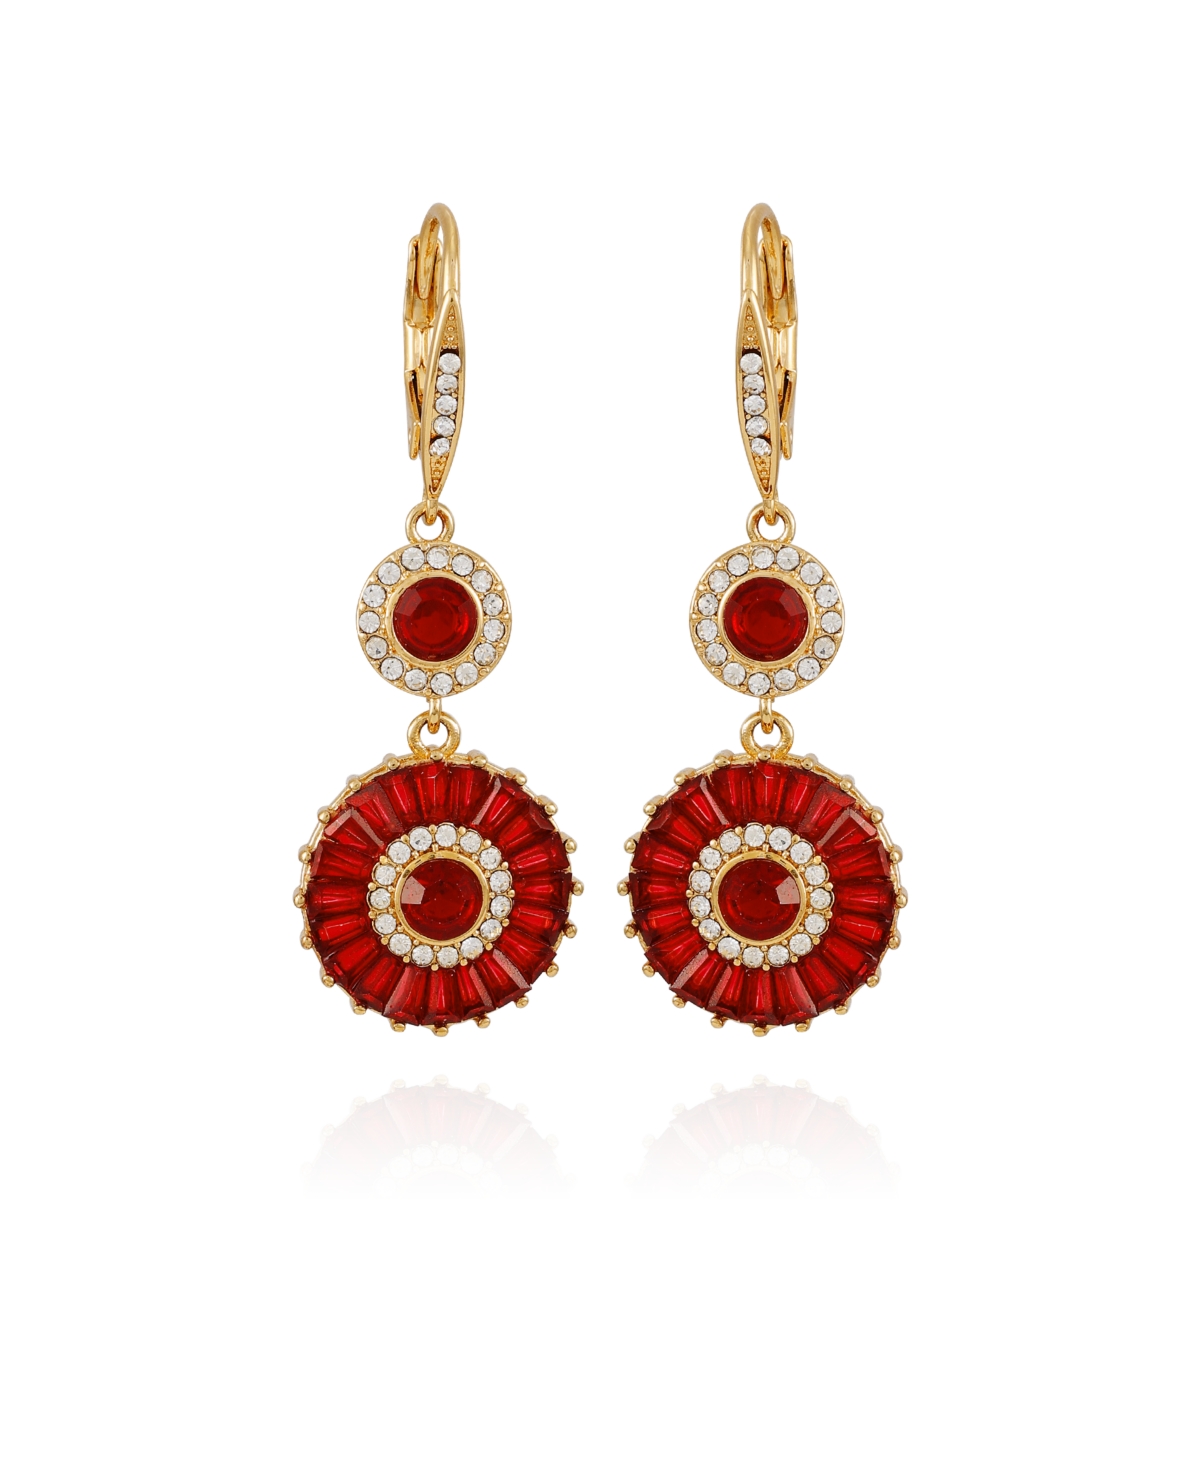 T Tahari Clear Glass Stone Circle Flower Drop Earrings In Red